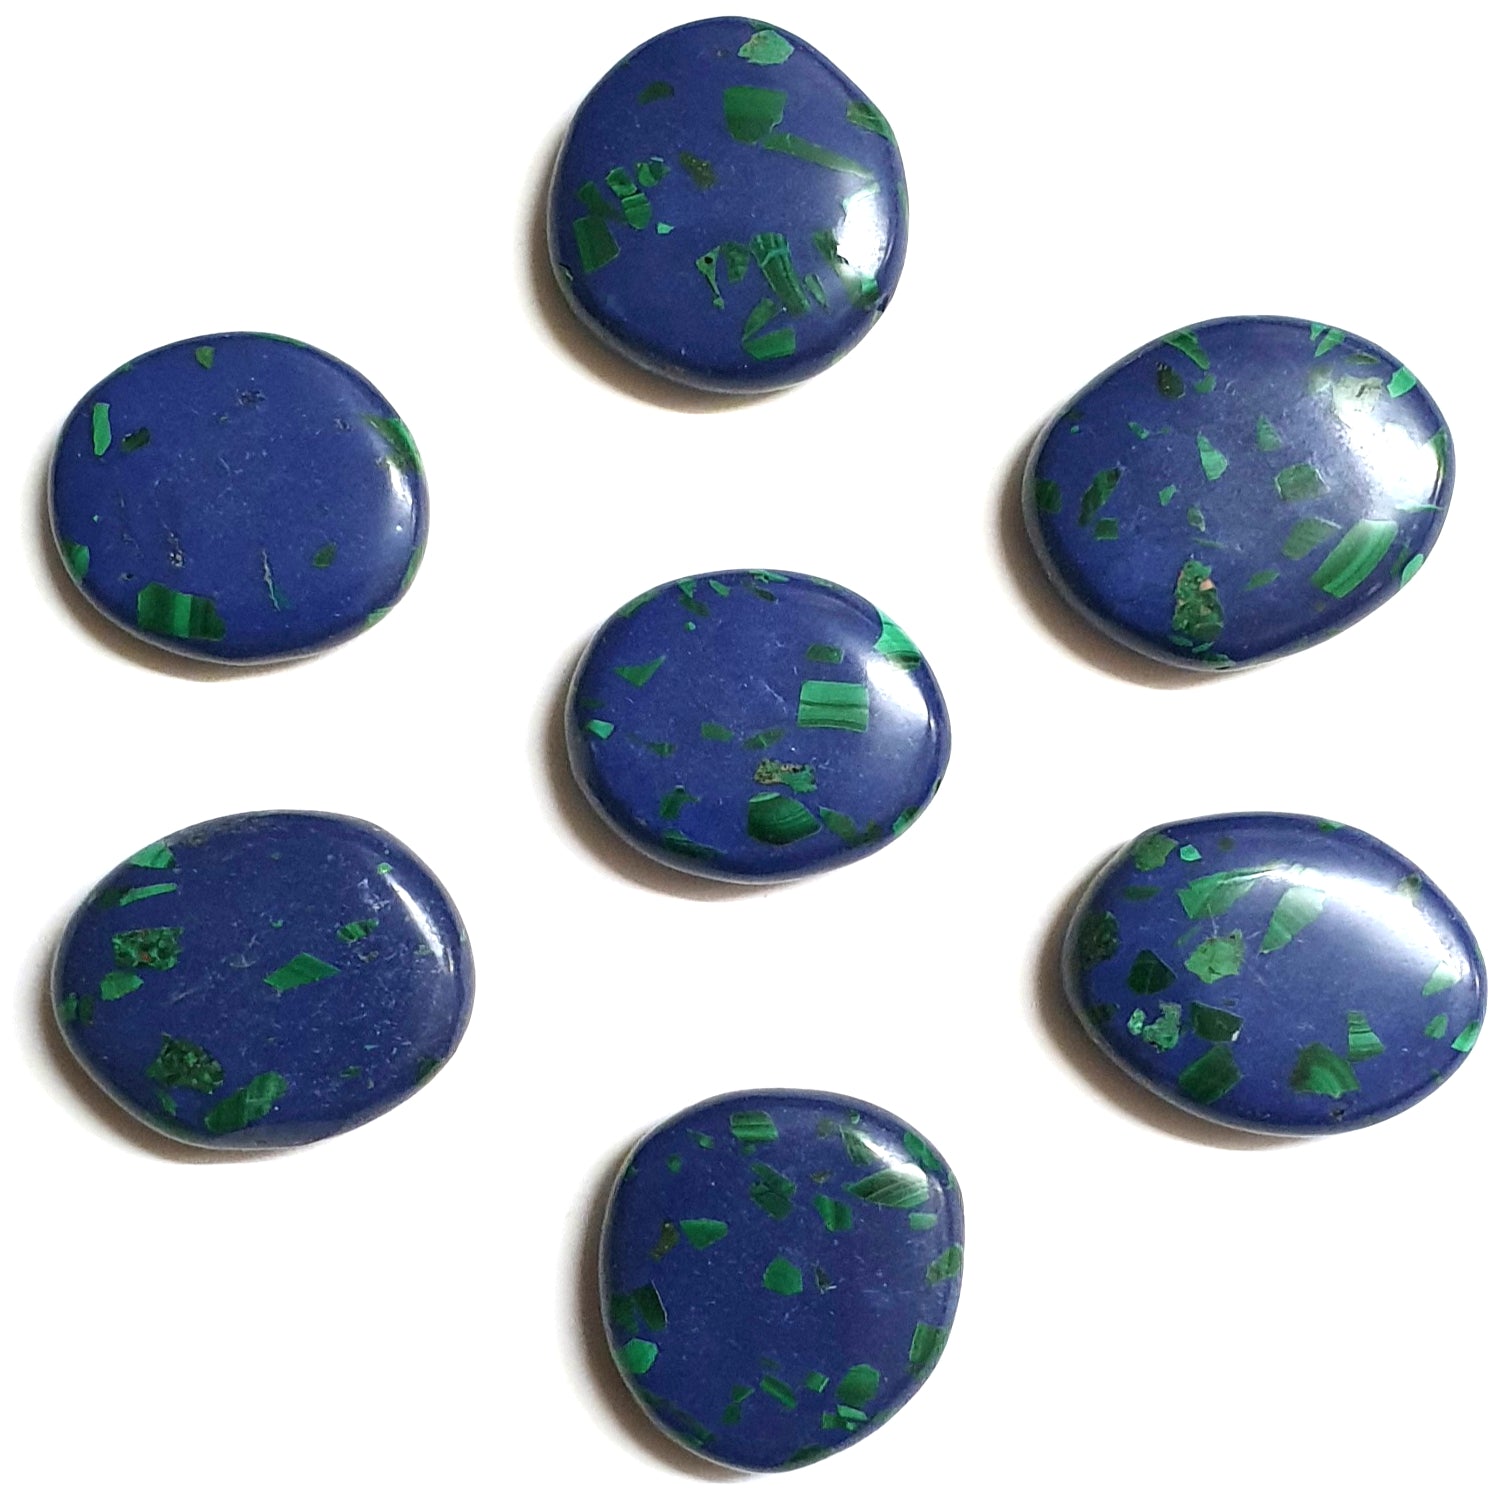 Azurite and Malachite Mini Ovals are approx 20mm long.  Each Oval has been hand polished.  Azurite and Malachite is also often found with Chrysocolla in addition to the metaphysical properties for each of the minerals, this combination can help extend ourselves to others, in the spirit of "brotherhood" and love.  I love this combination as it provides a demonstration of compassion, intelligence, promoting both philanthropic tendencies and attachments to "rightmindness".